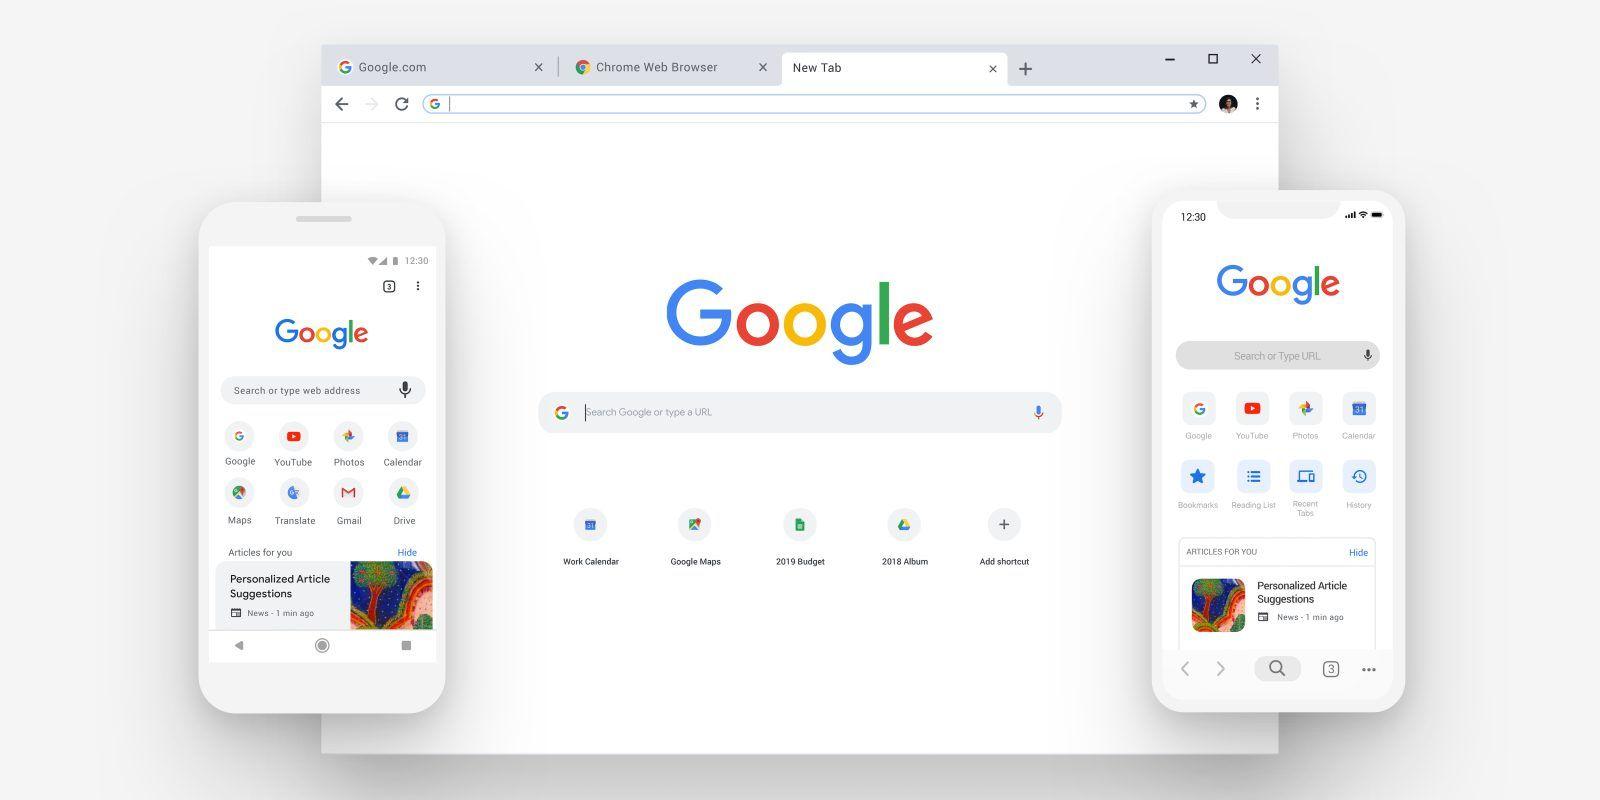 Chrome Mac Logo - Chrome 71 for Mac, Windows, and Linux rolling out